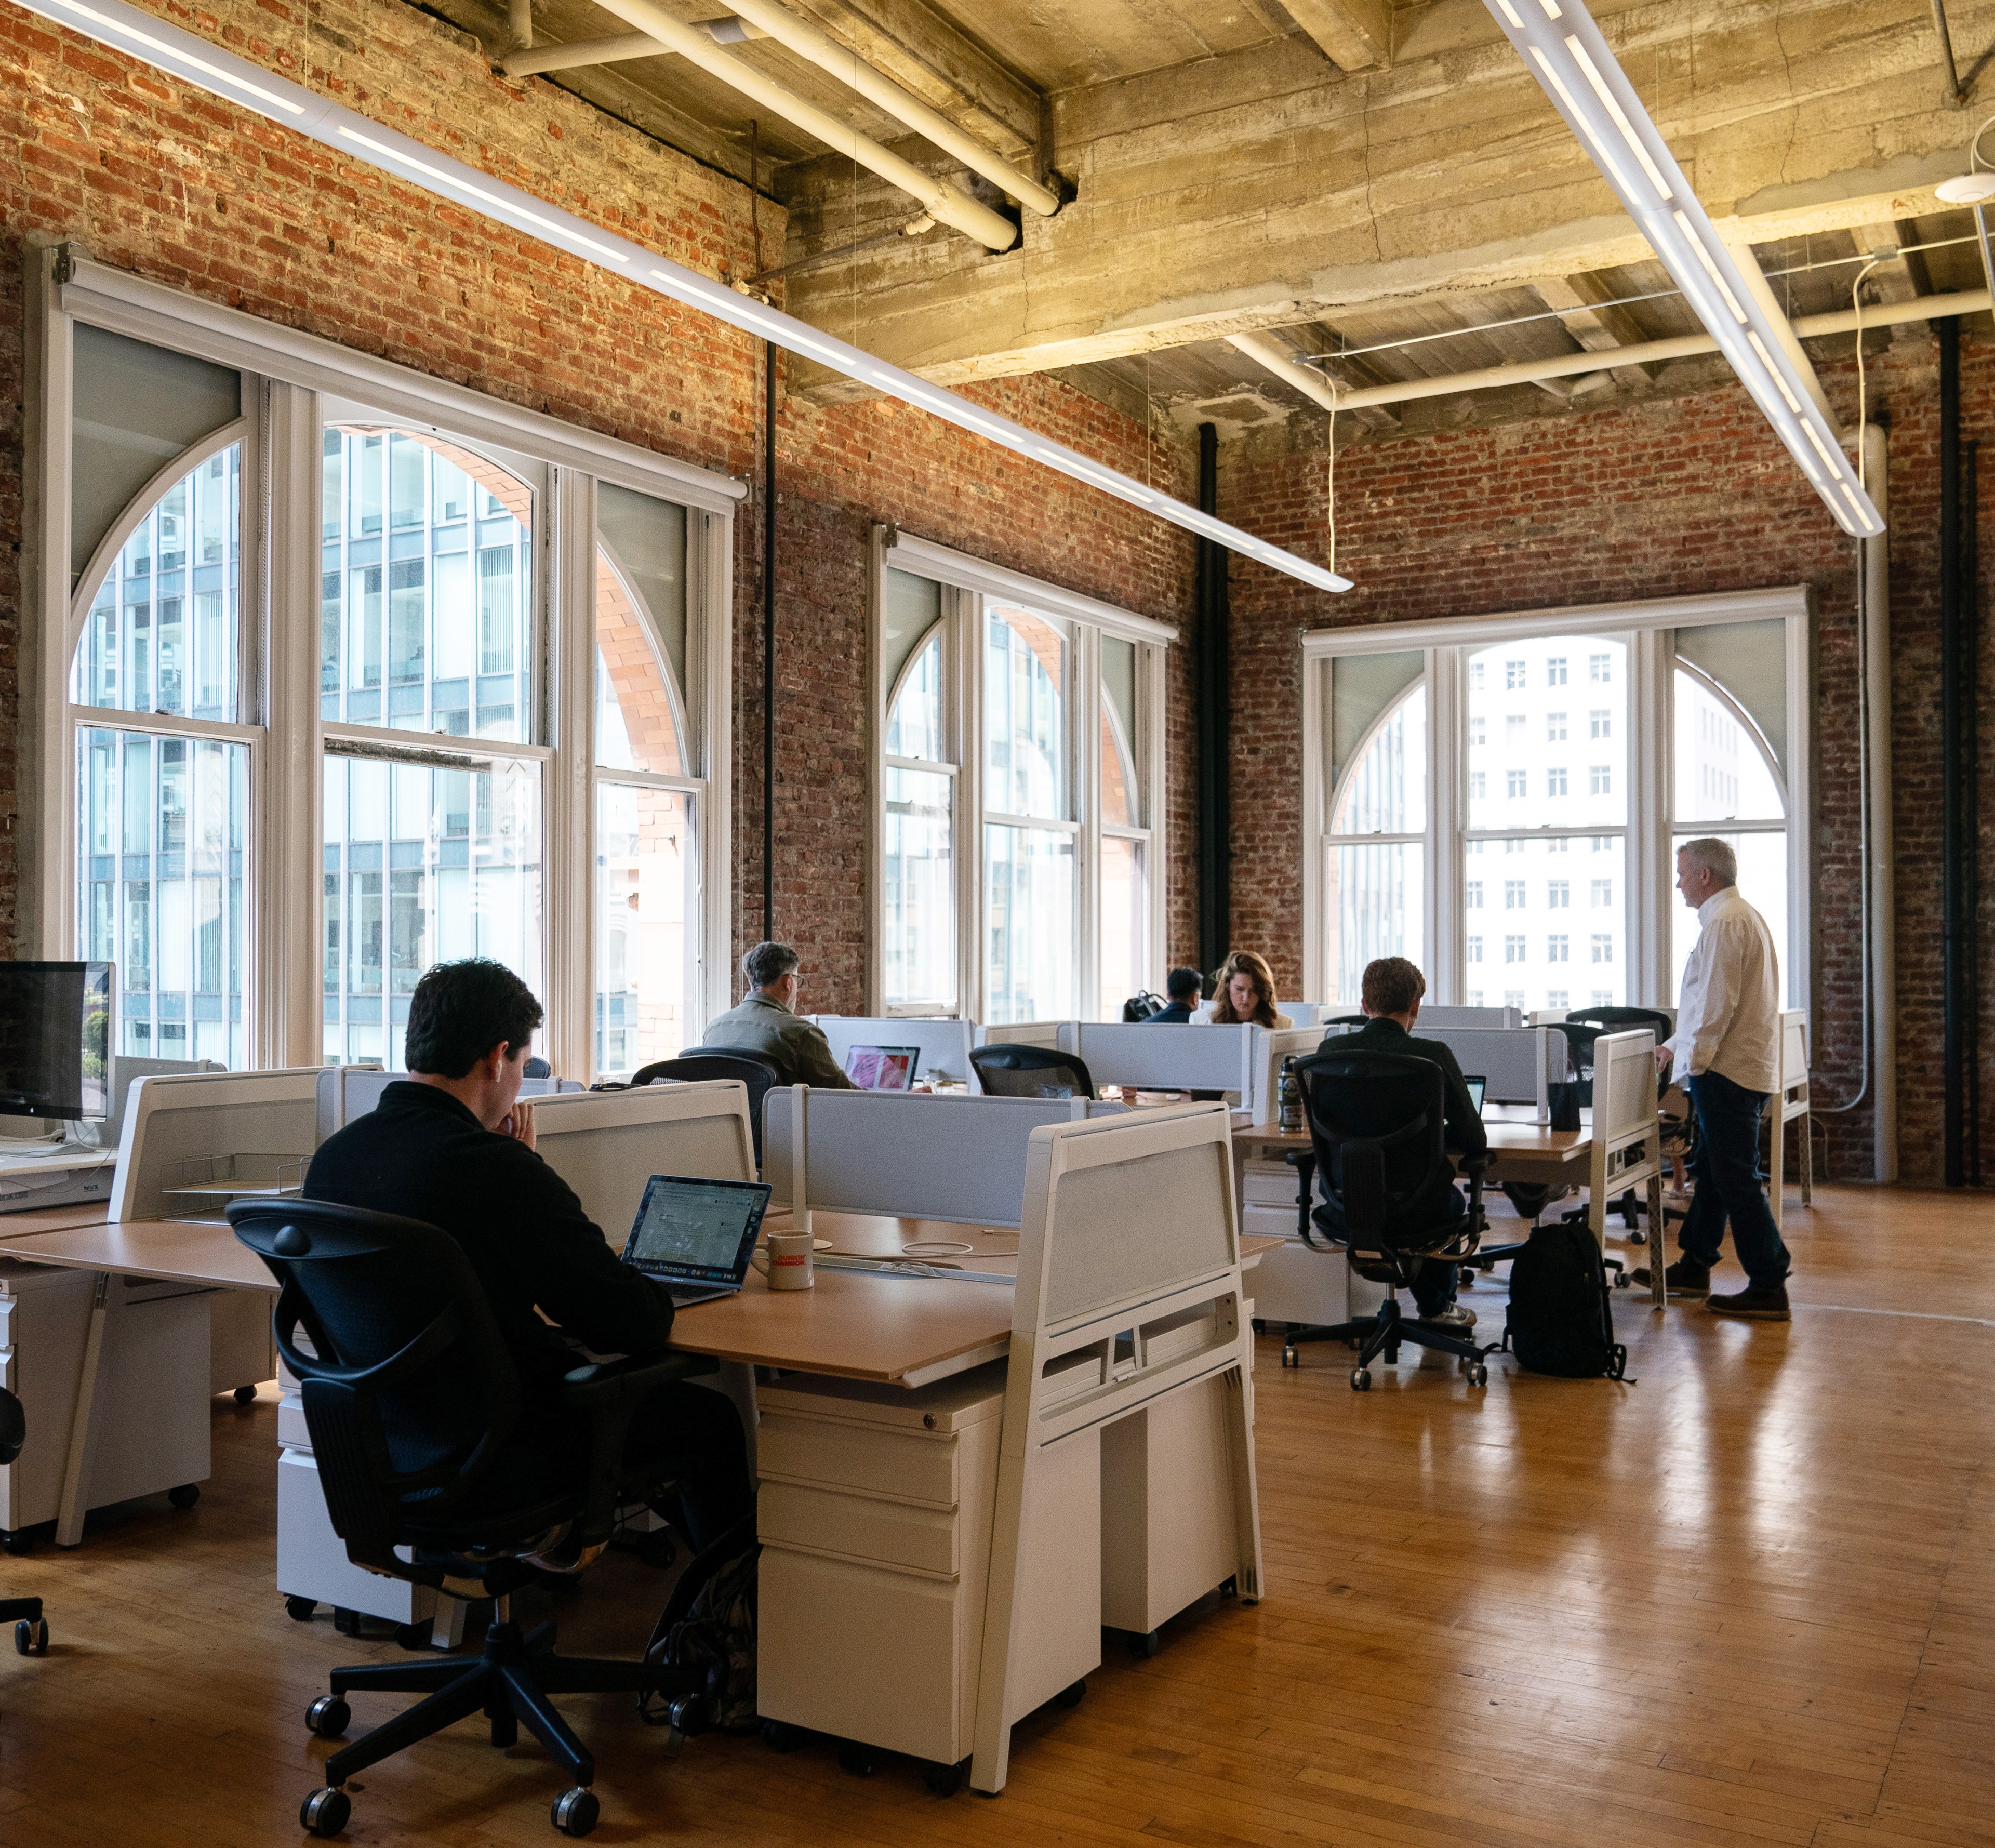 An open-plan office with exposed brick walls and large arched windows; several people are working at desks with computers, and one person is standing and talking.